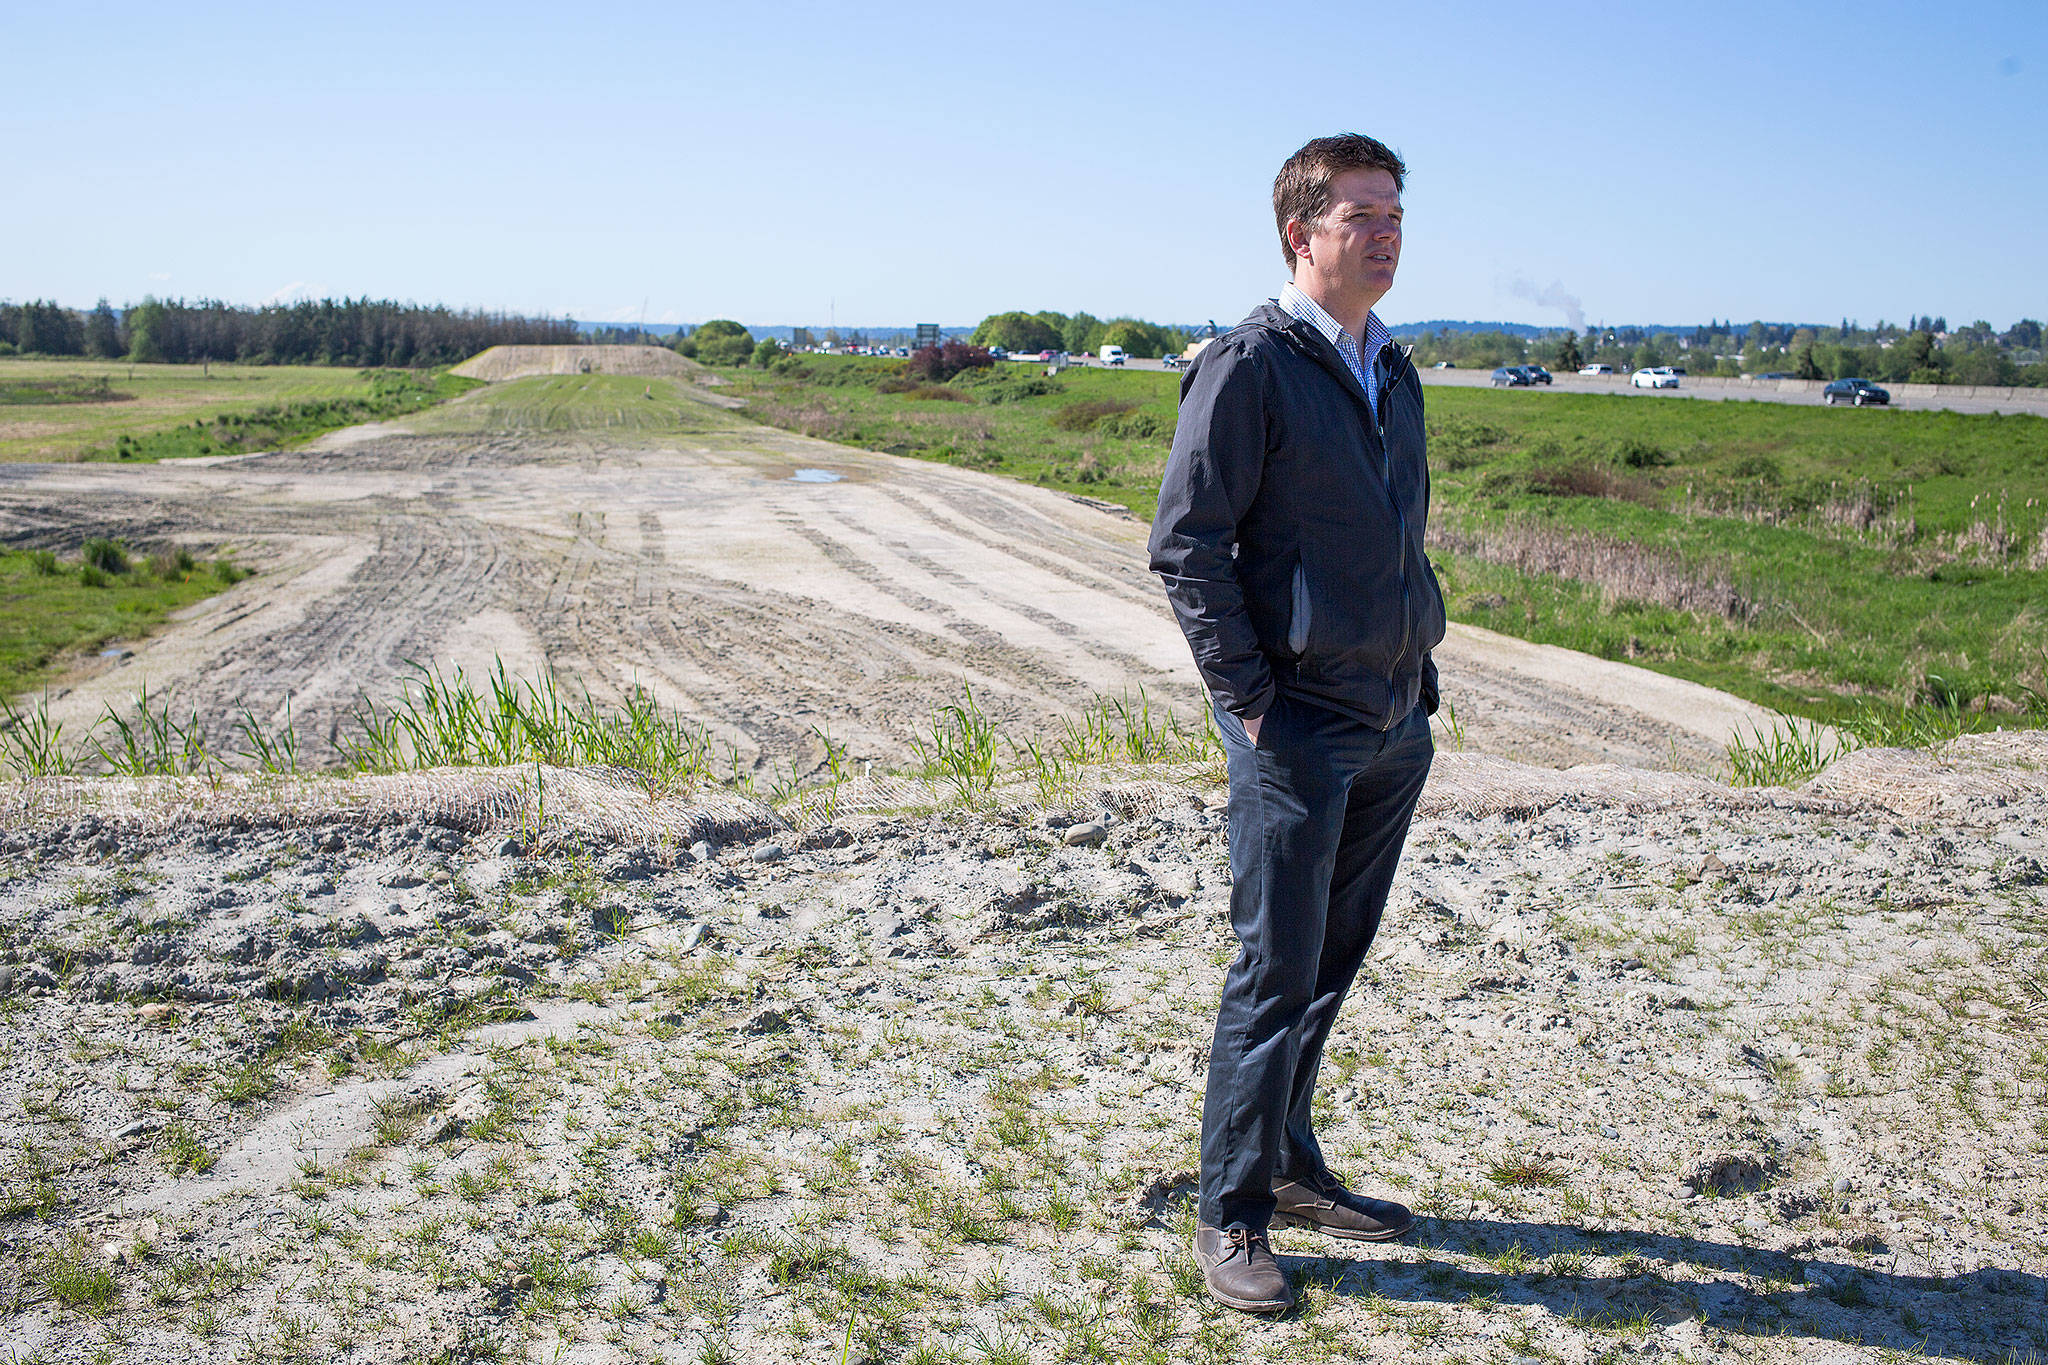 Erik Gerking, the Port of Everett’s director of environmental programs, walks along the separation dike on the east side of I-5 on Monday. The port, working with a private company, has been stockpiling clean fill dirt for an upcoming habitat project in the Snohomish River estuary. (Andy Bronson / The Herald)